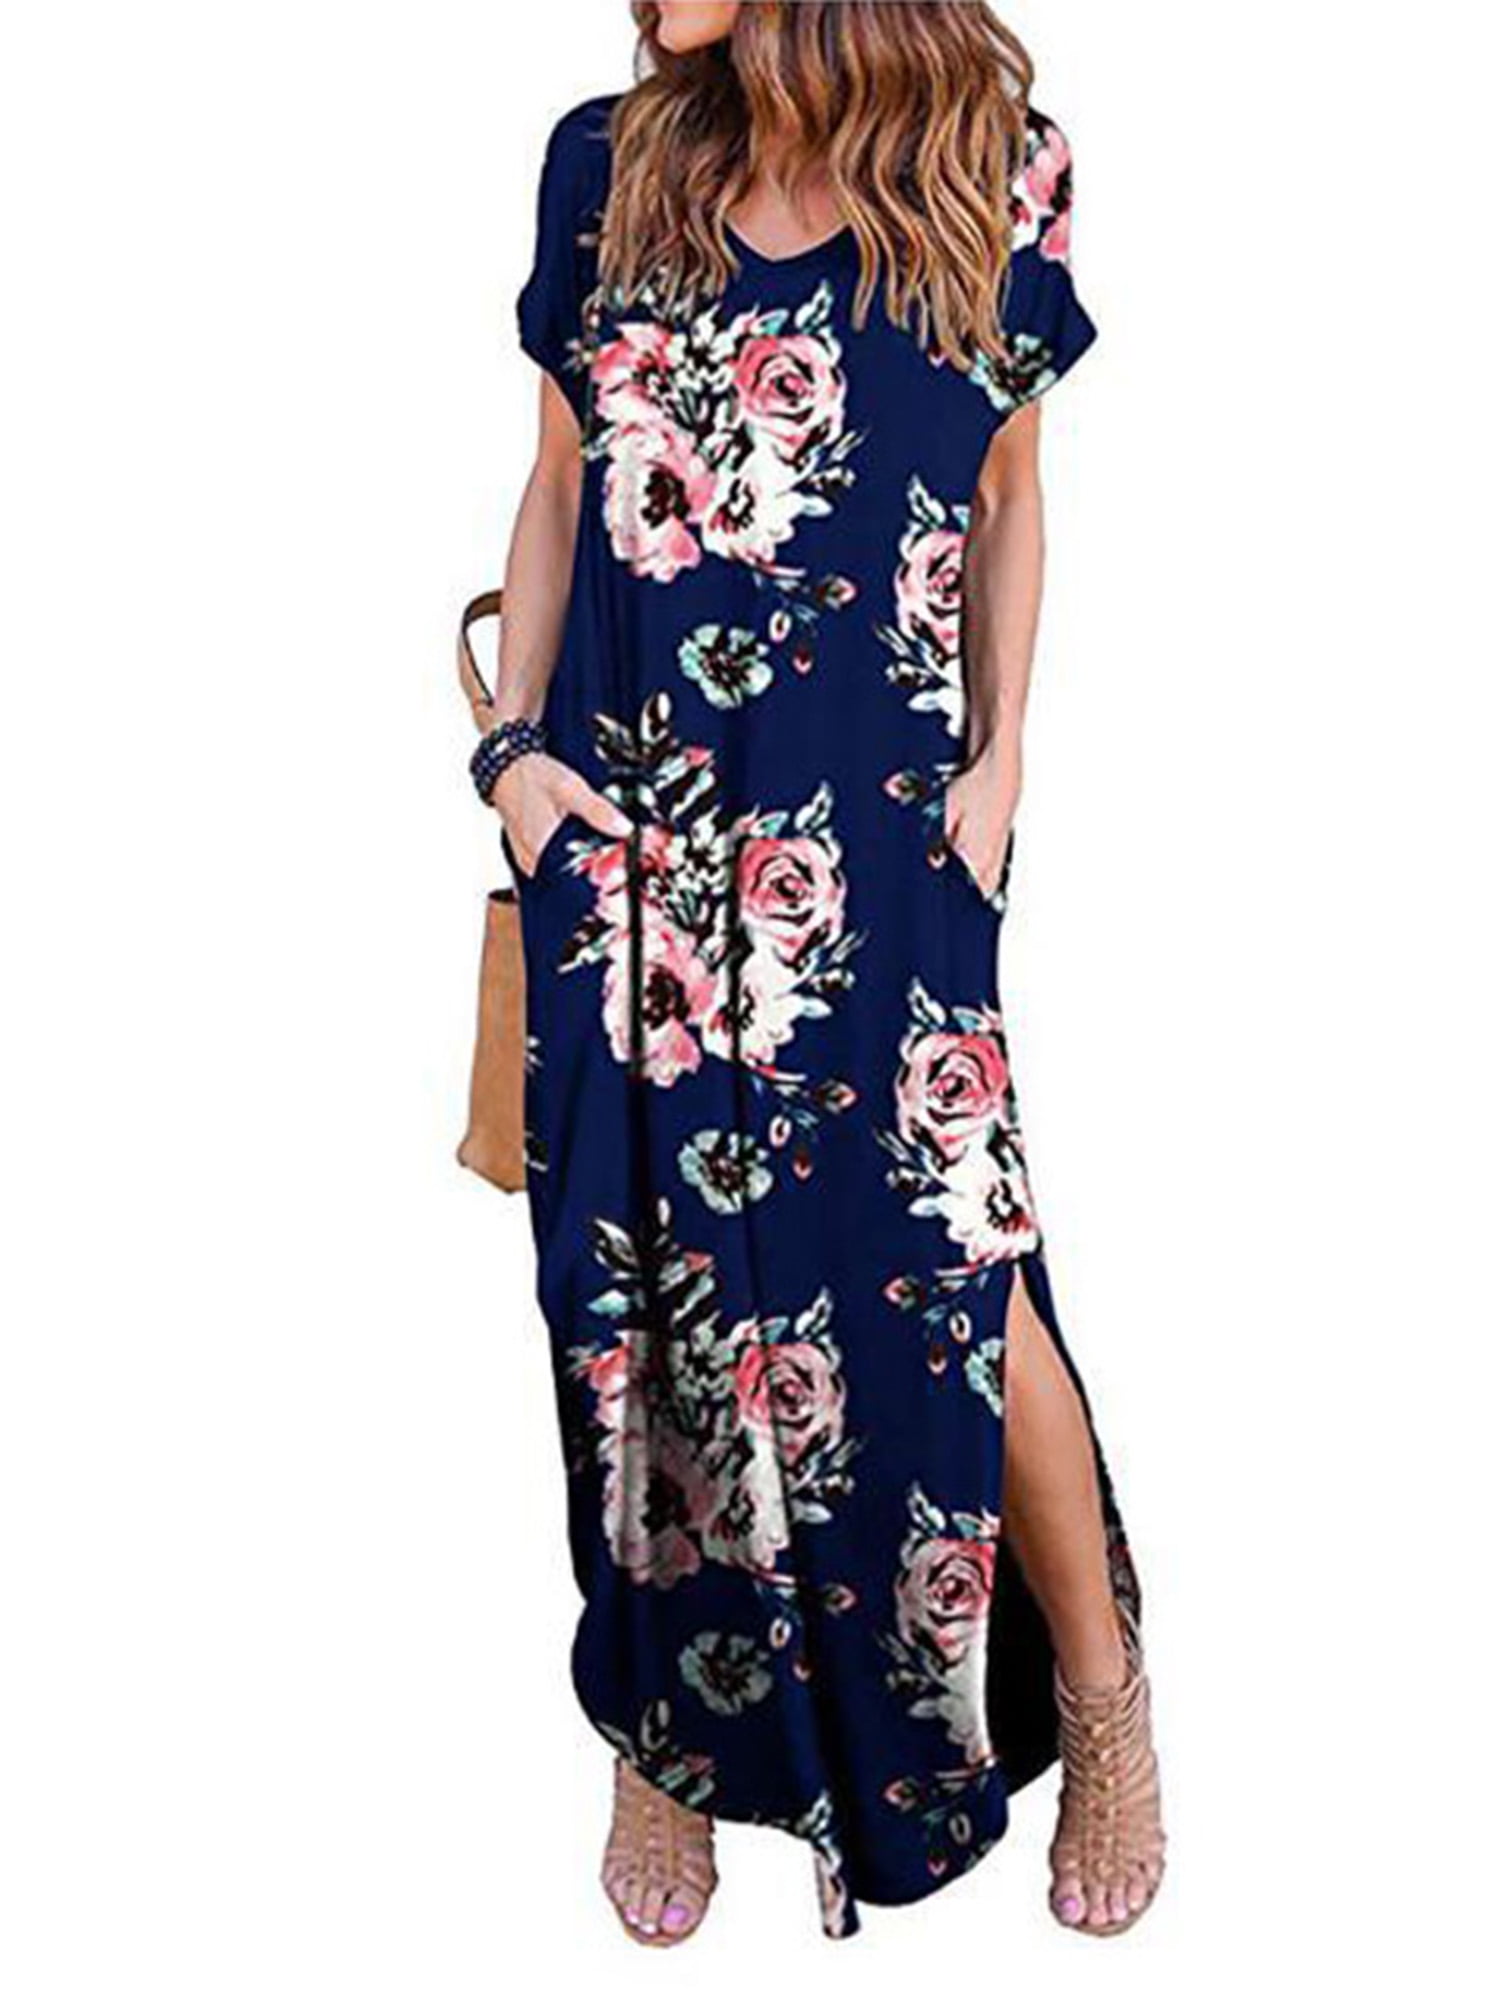 Women Floral Print Baggy Holiday Party Maxi Dress Loose Long Sleeveless Dresses